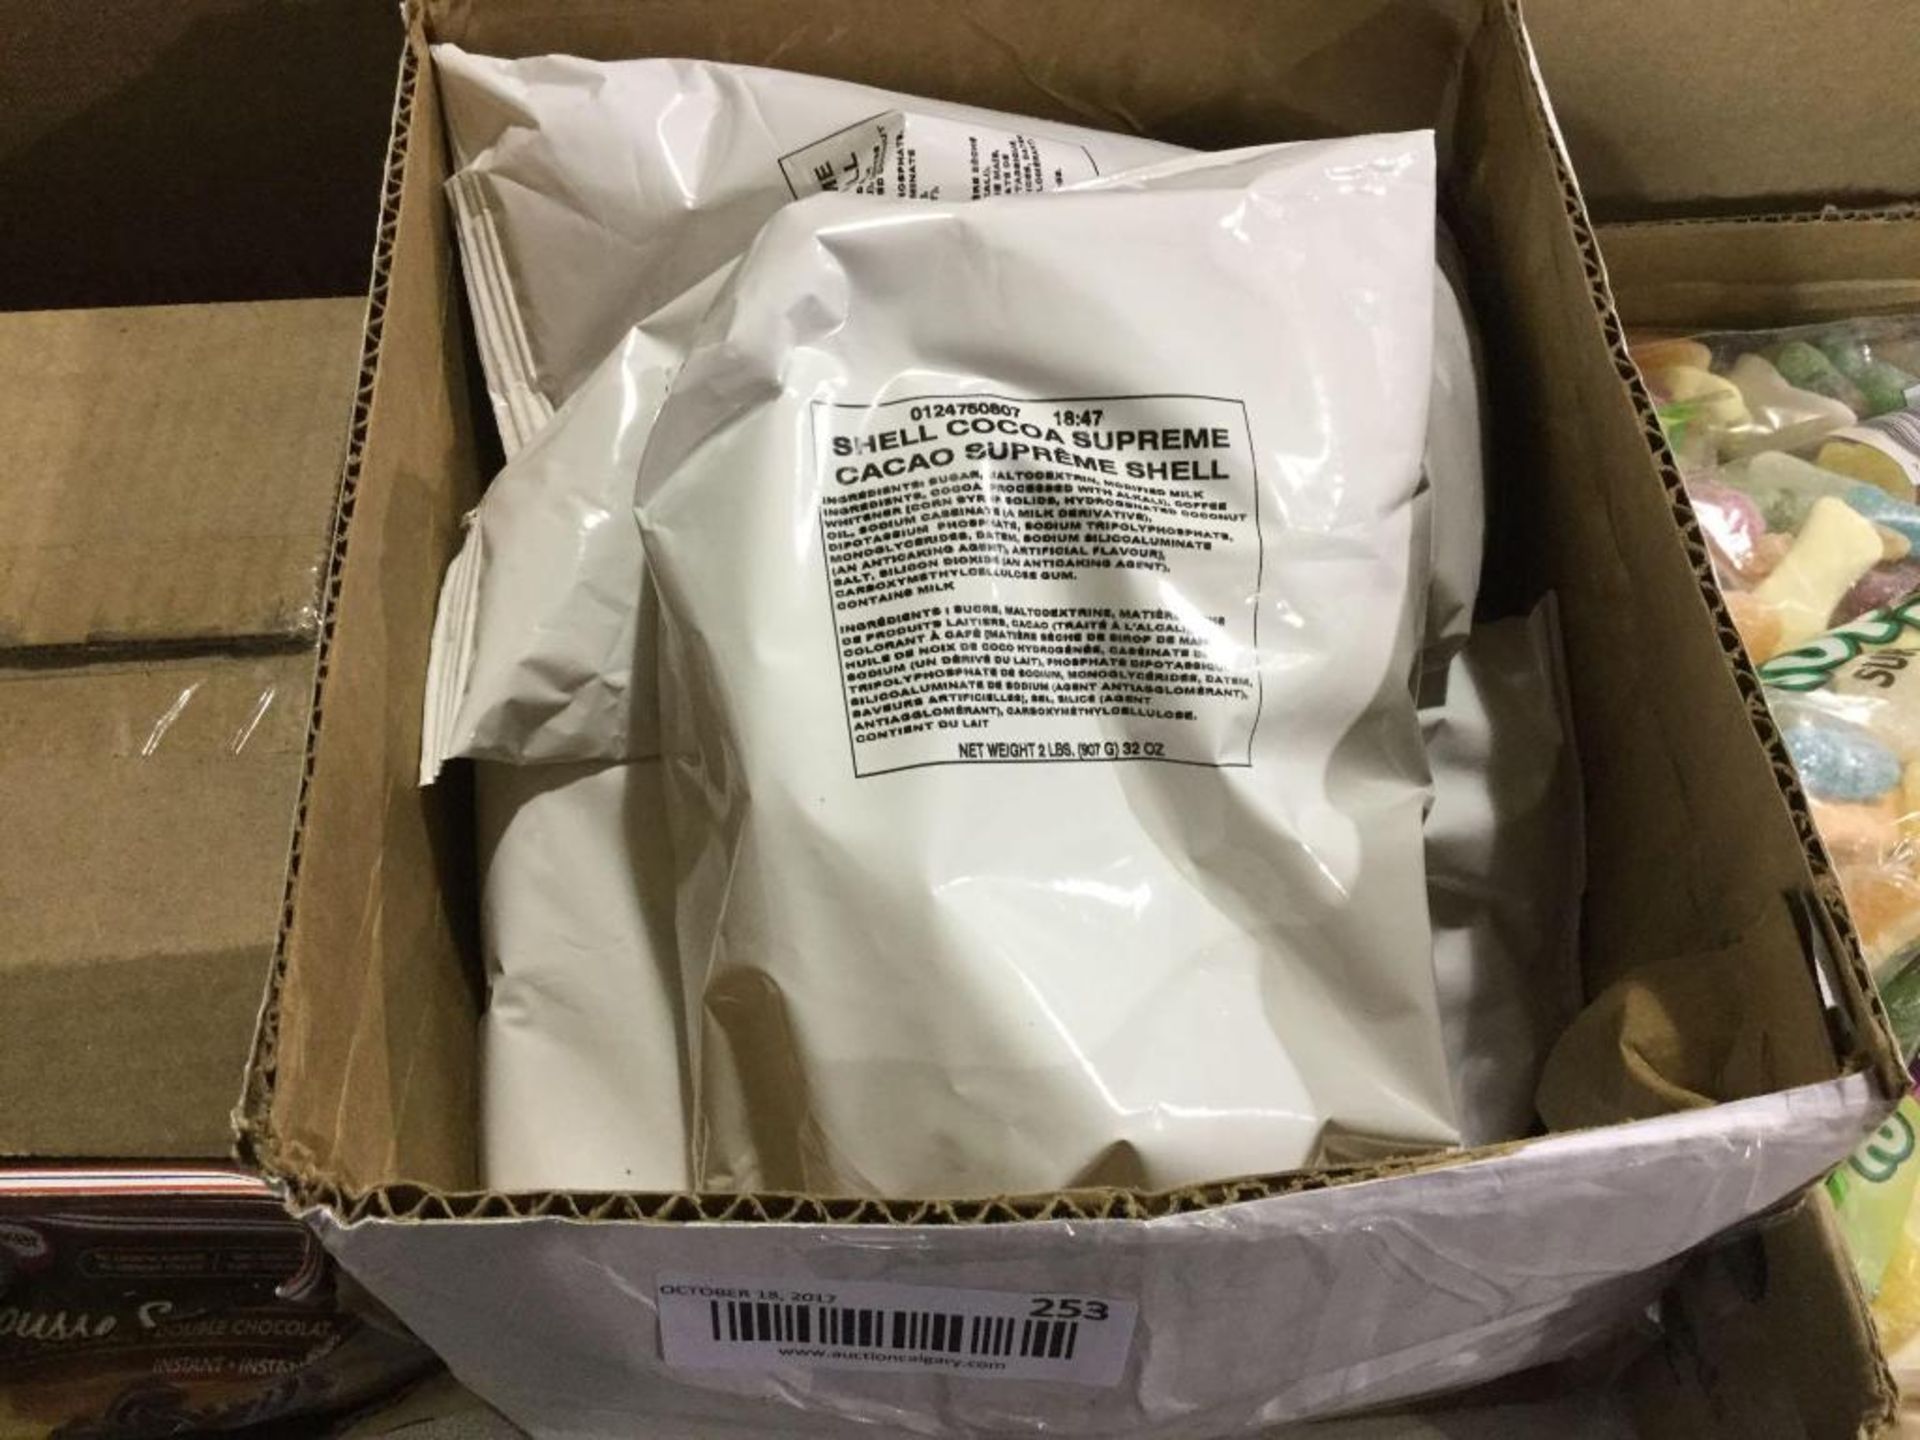 Box of approx 6 x 2lb bags of Shell Cocoa Supreme mix